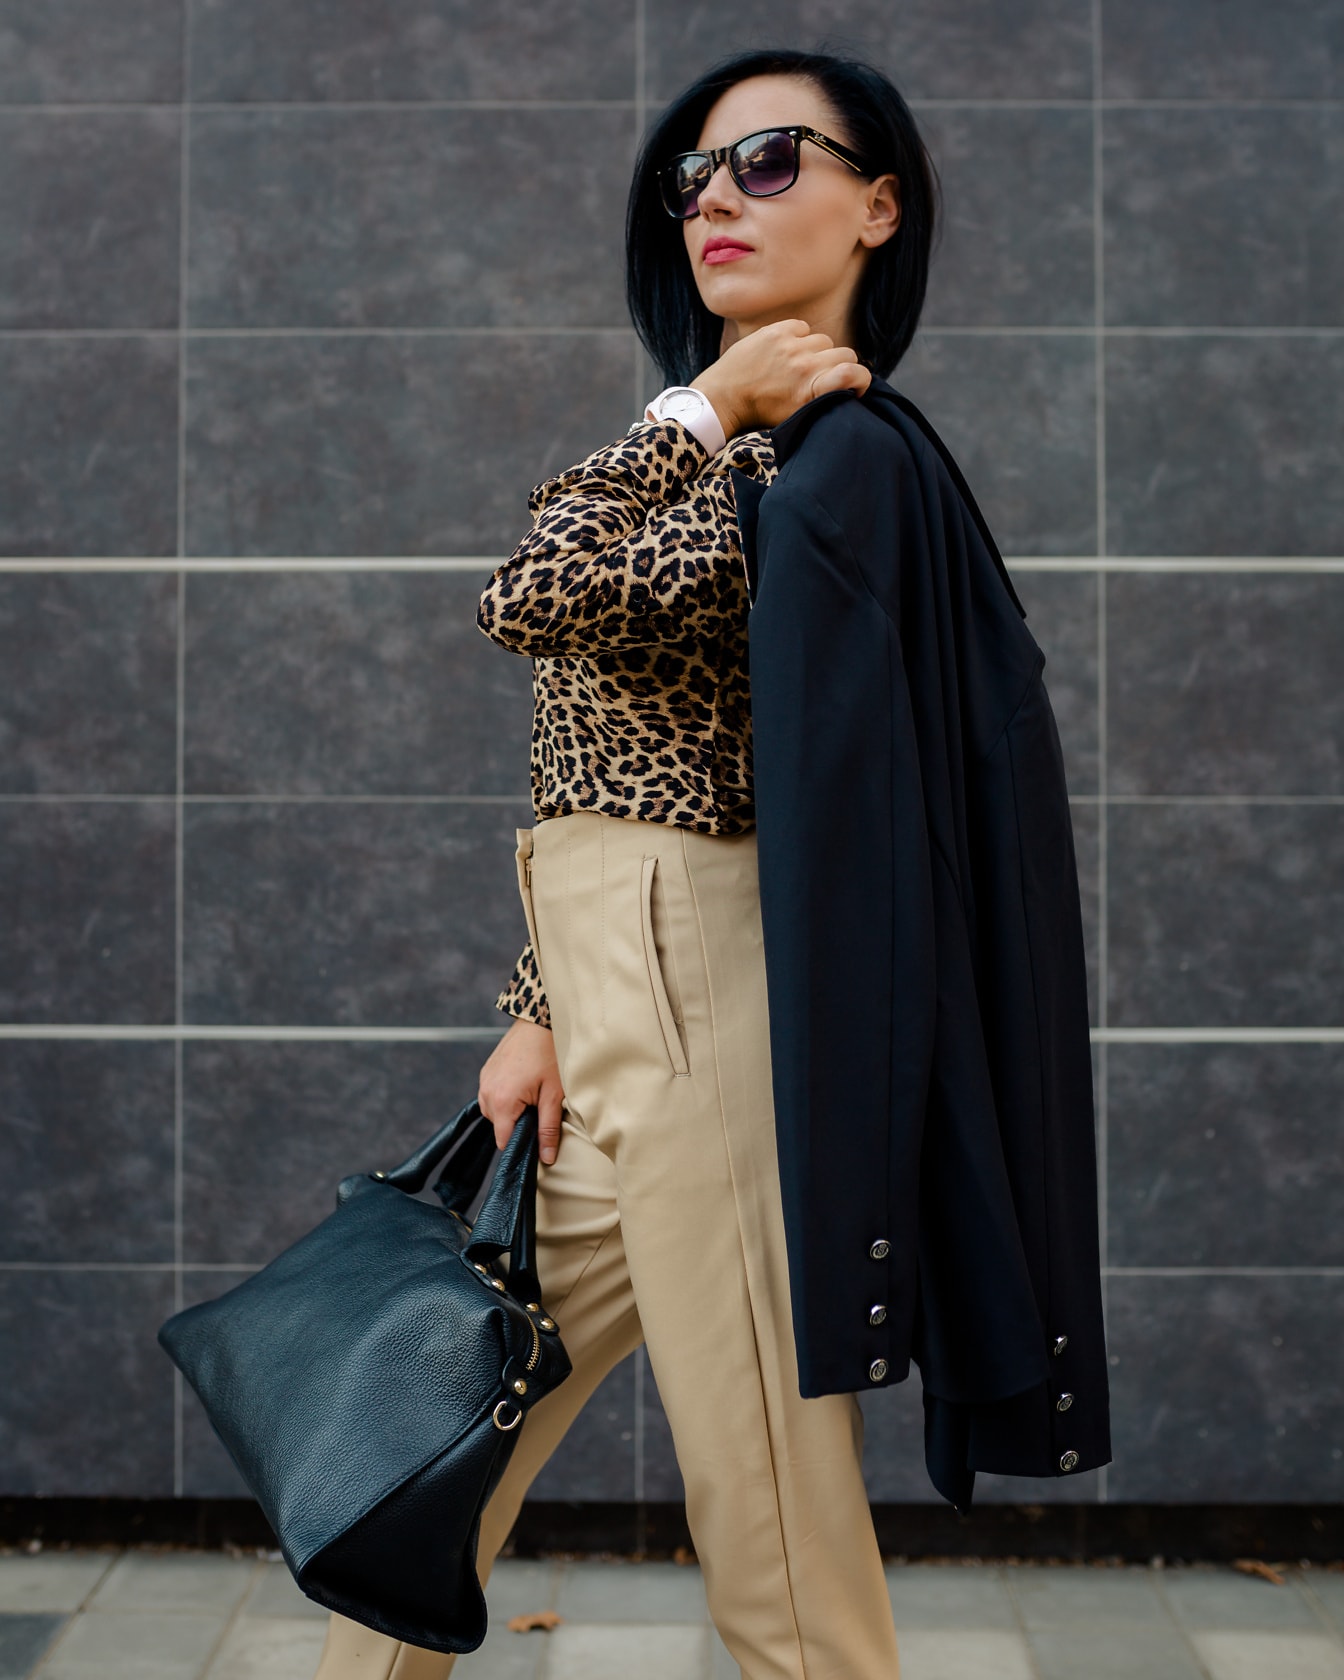 Businesswoman in leopard print shirt and fashionable pants holding a black bag